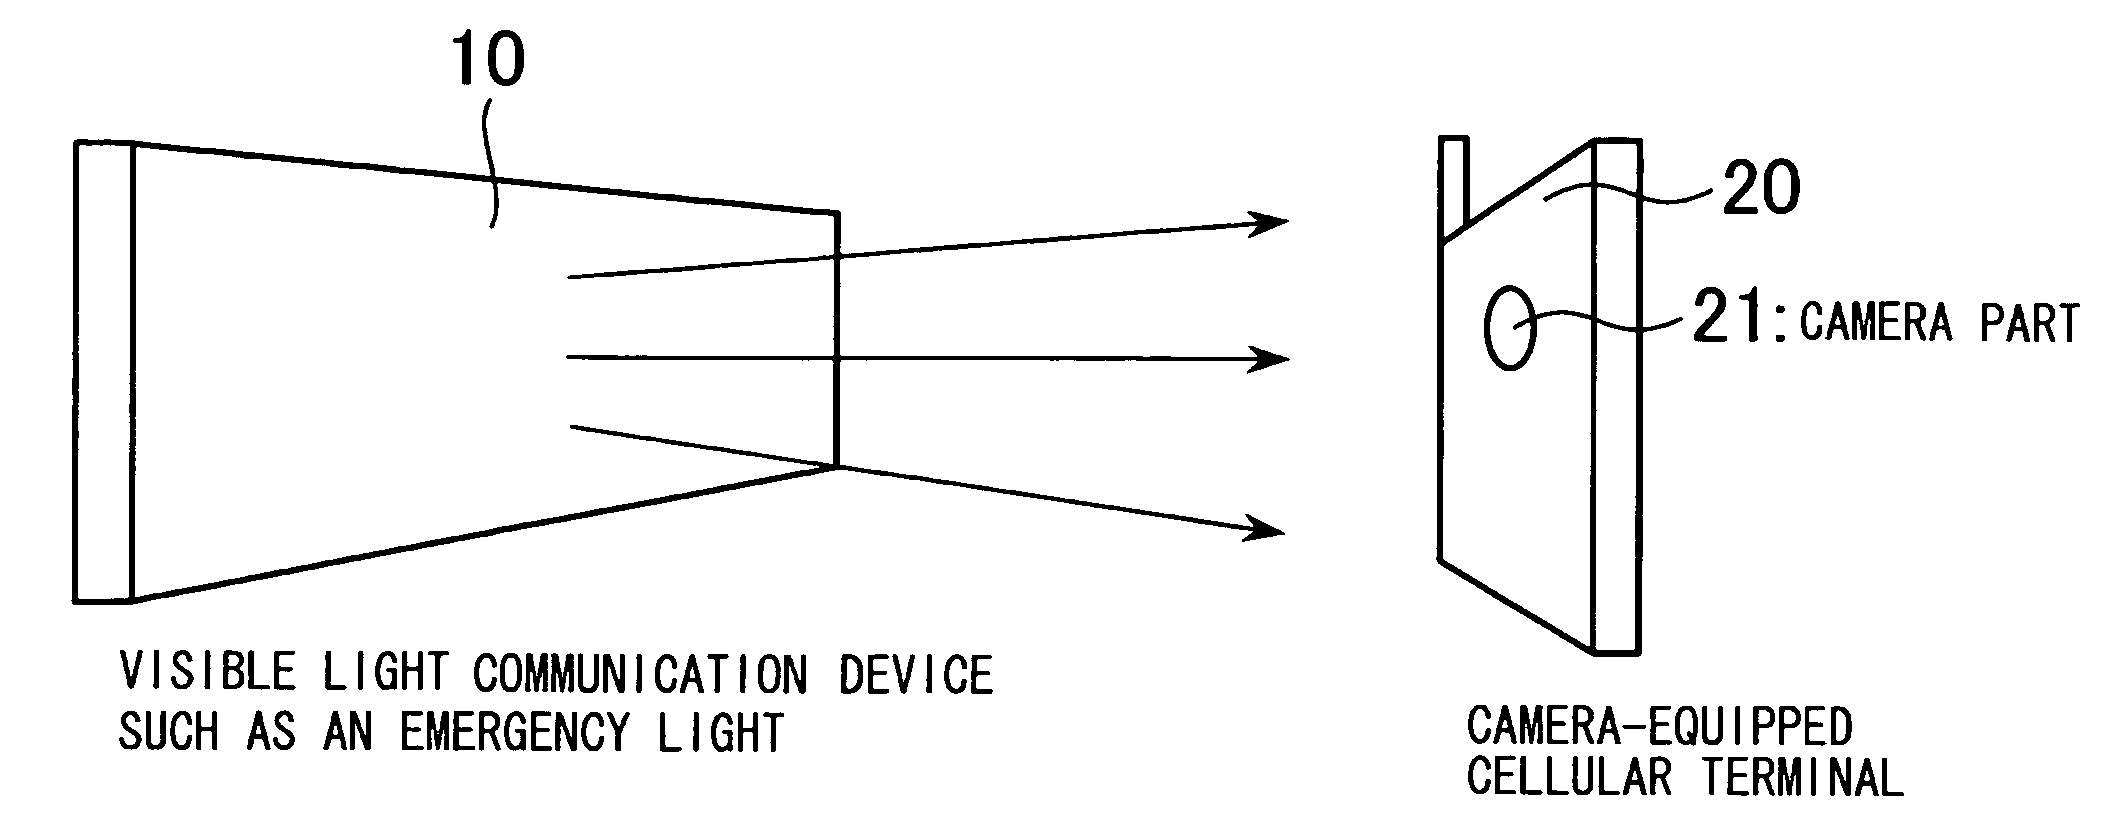 Camera-Equipped Cellular Terminal for Visible Light Communication